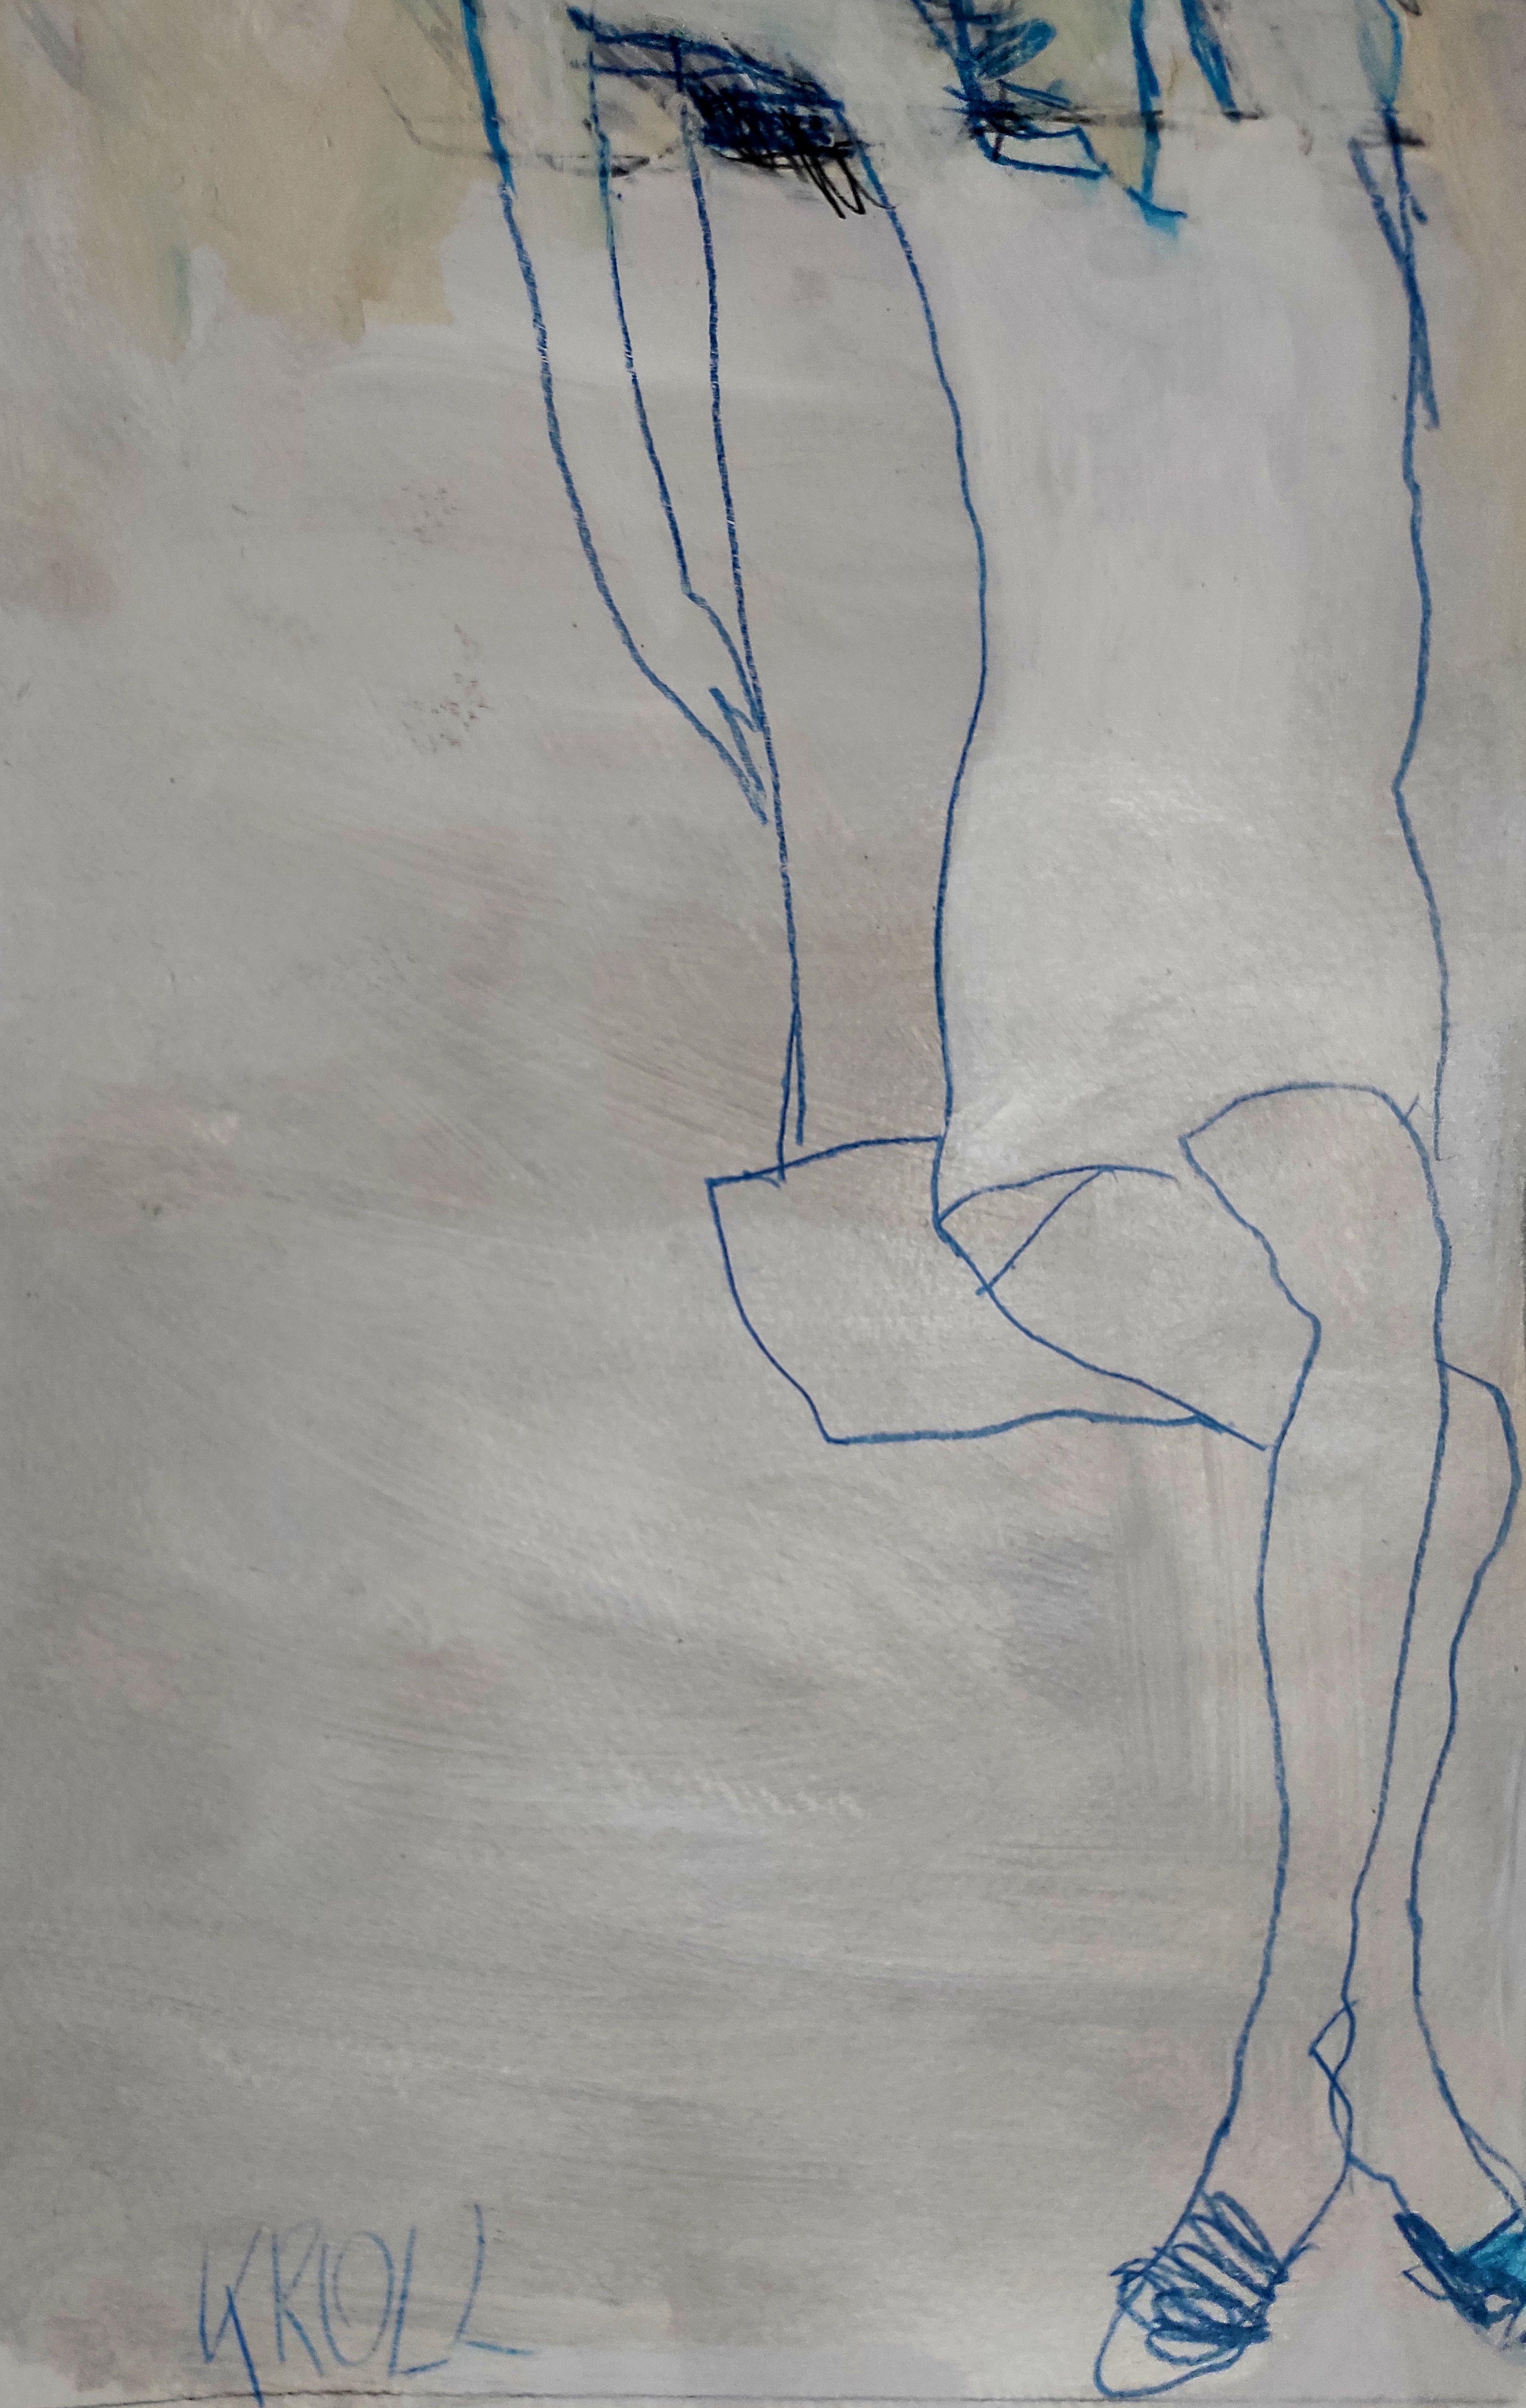 Seated Woman in Blue, Drawing, Pencil/Colored Pencil on Paper - Expressionist Art by Barbara Kroll